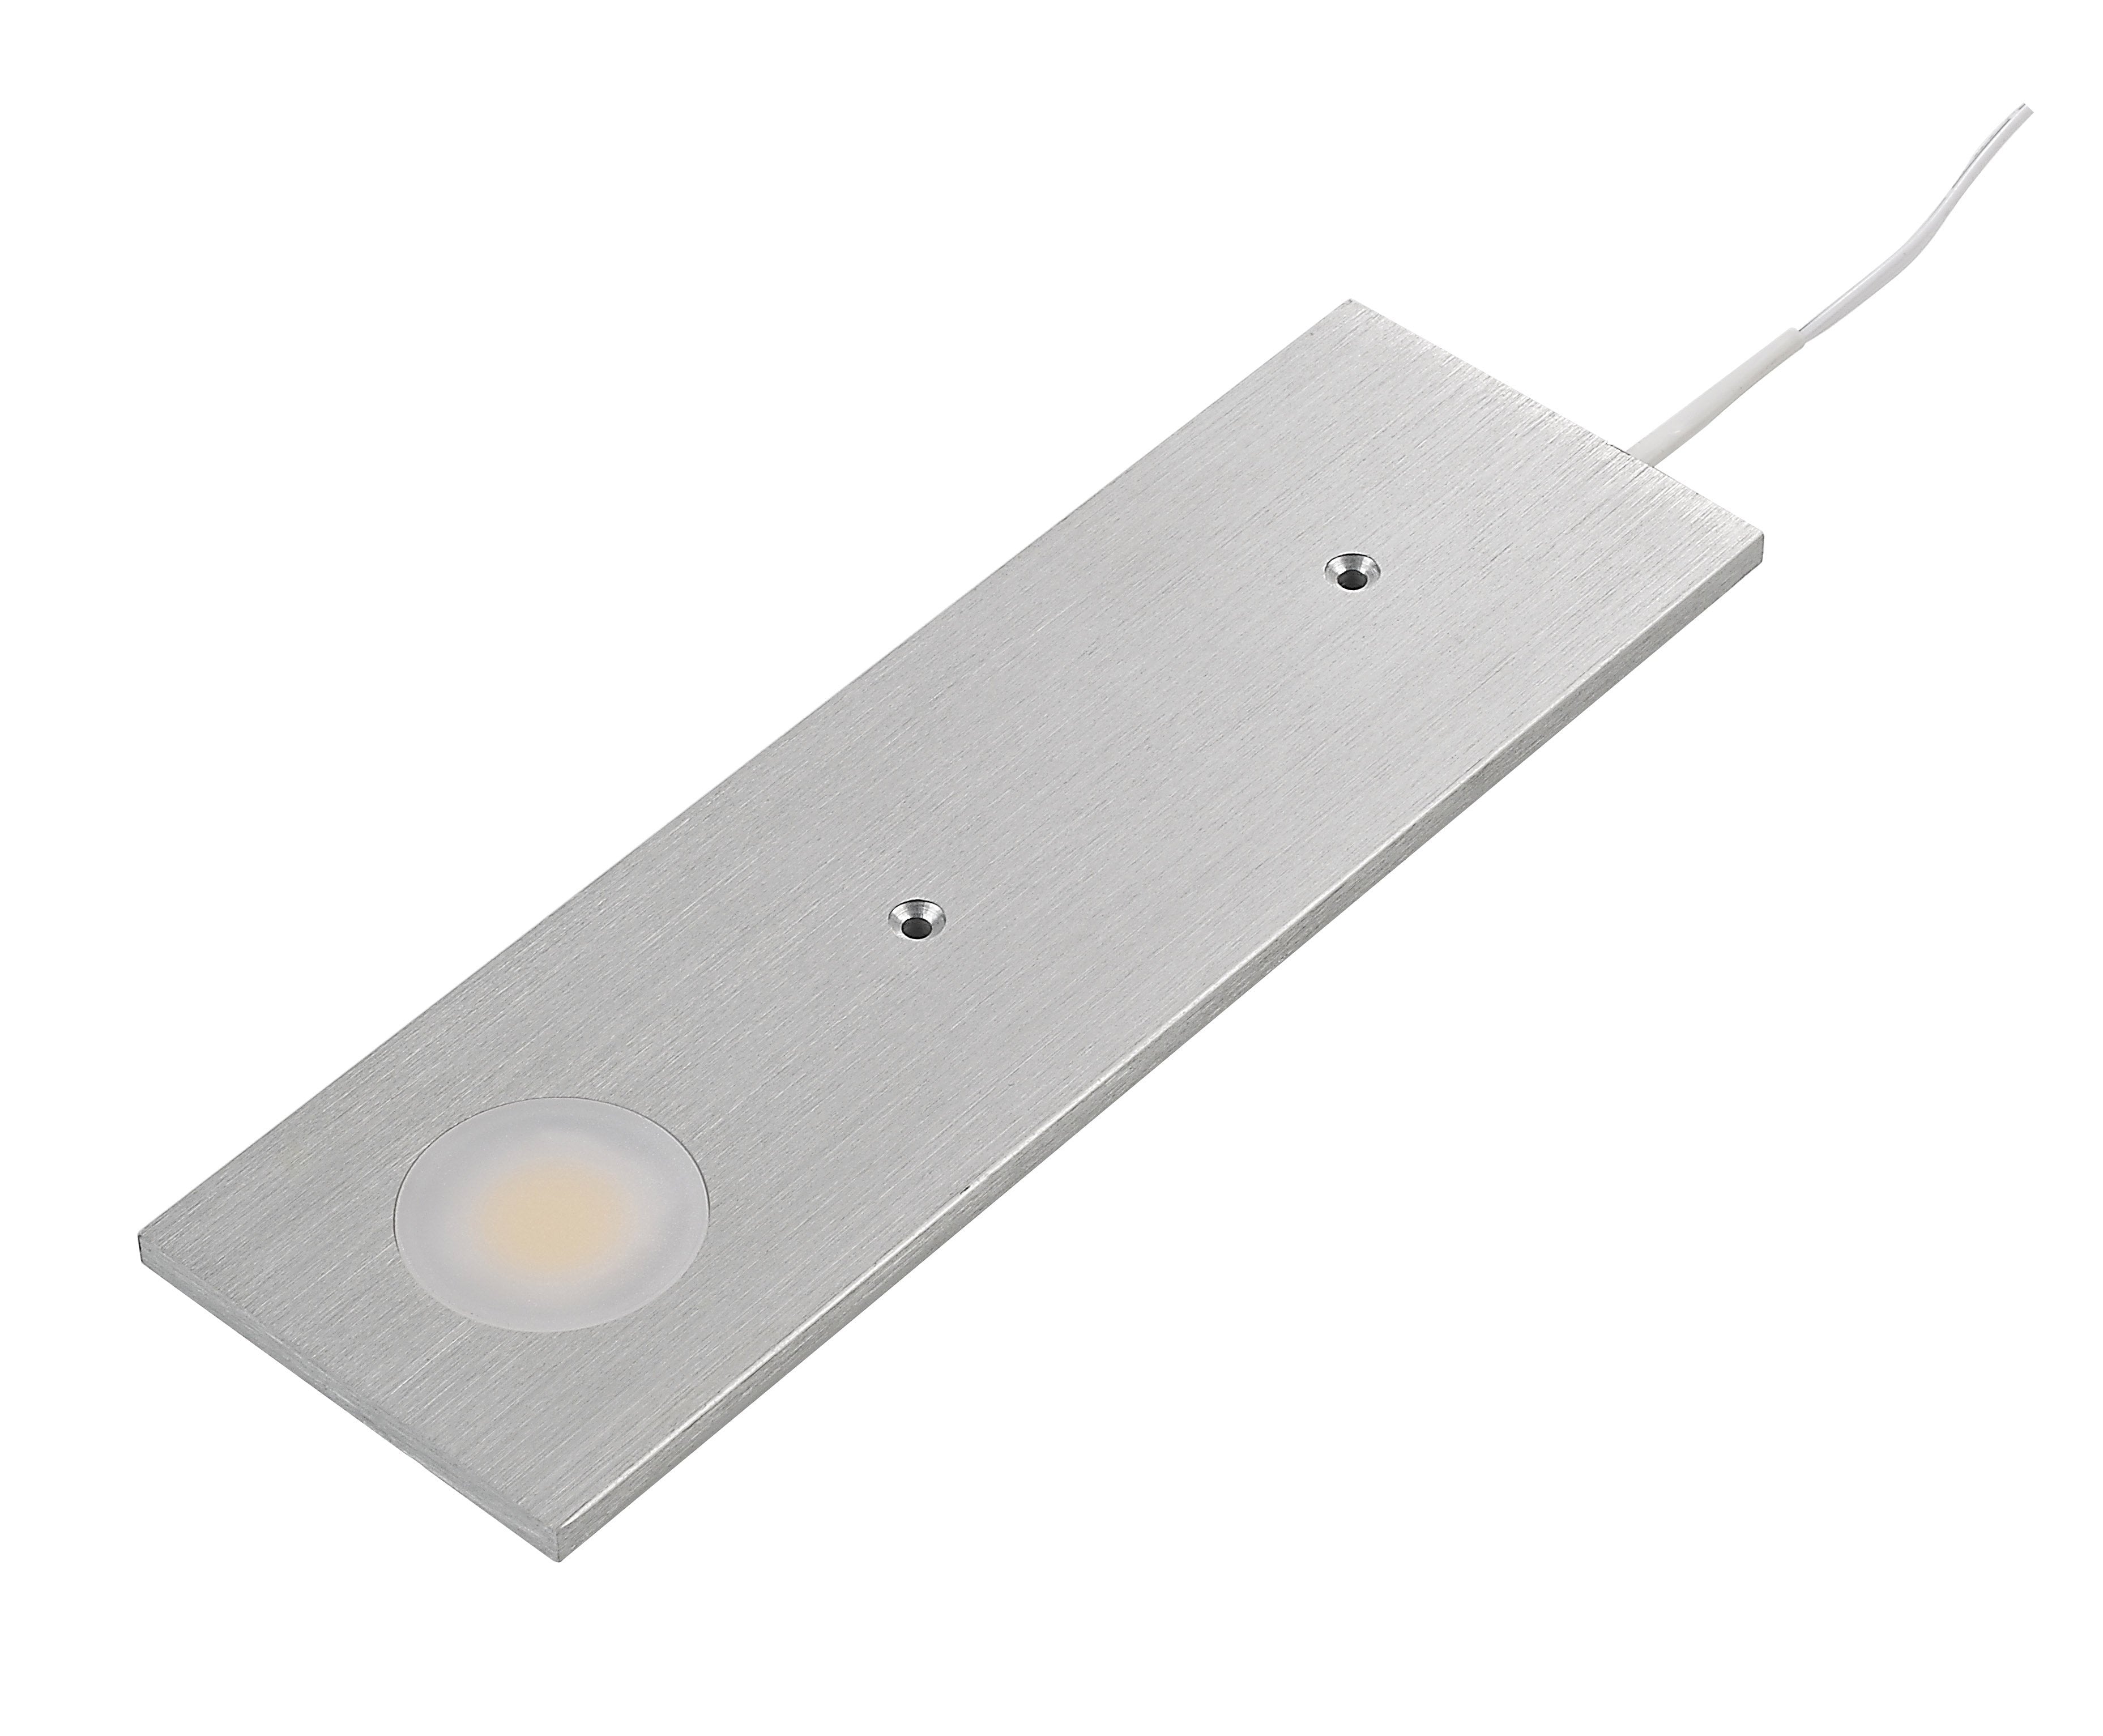 Contempoary ultra thin LED under cabinet light